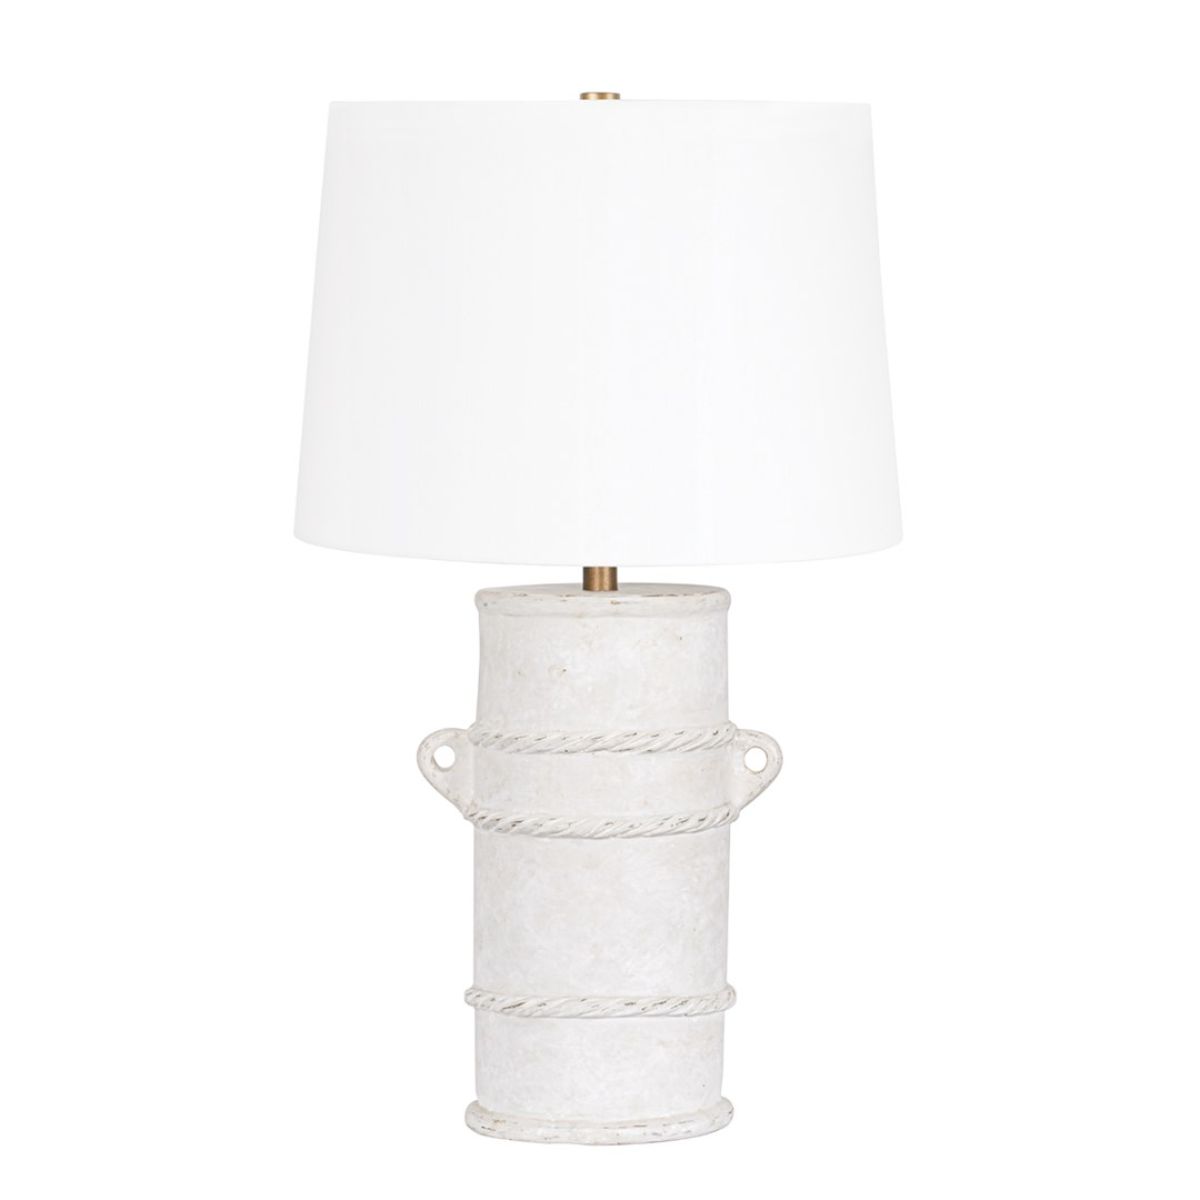 Siena Table Lamp Whitewash Terracotta with Patina Brass Accents